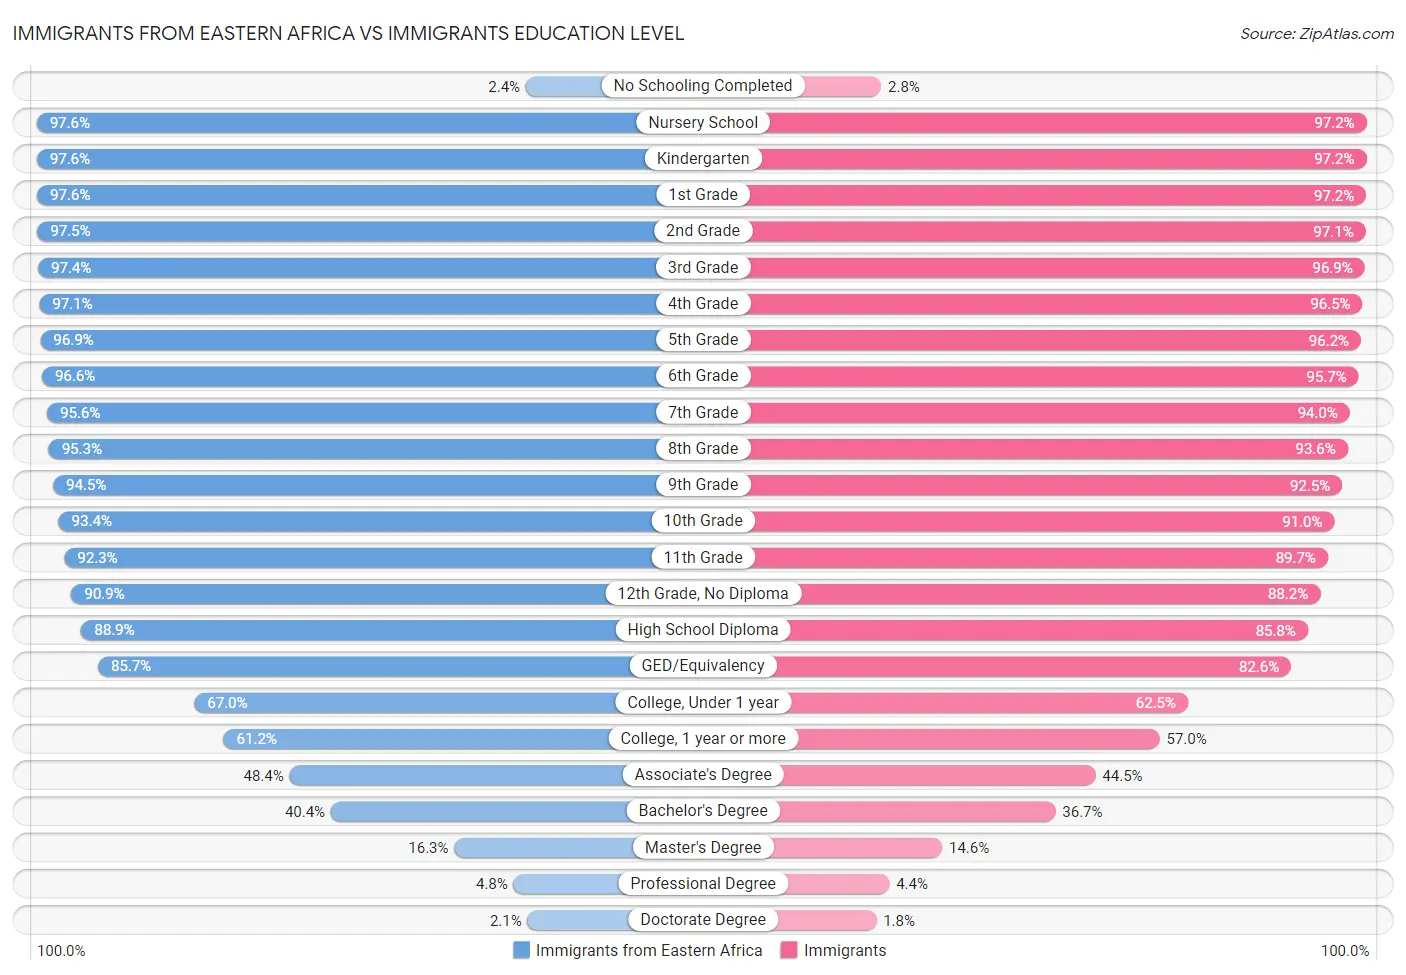 Immigrants from Eastern Africa vs Immigrants Education Level